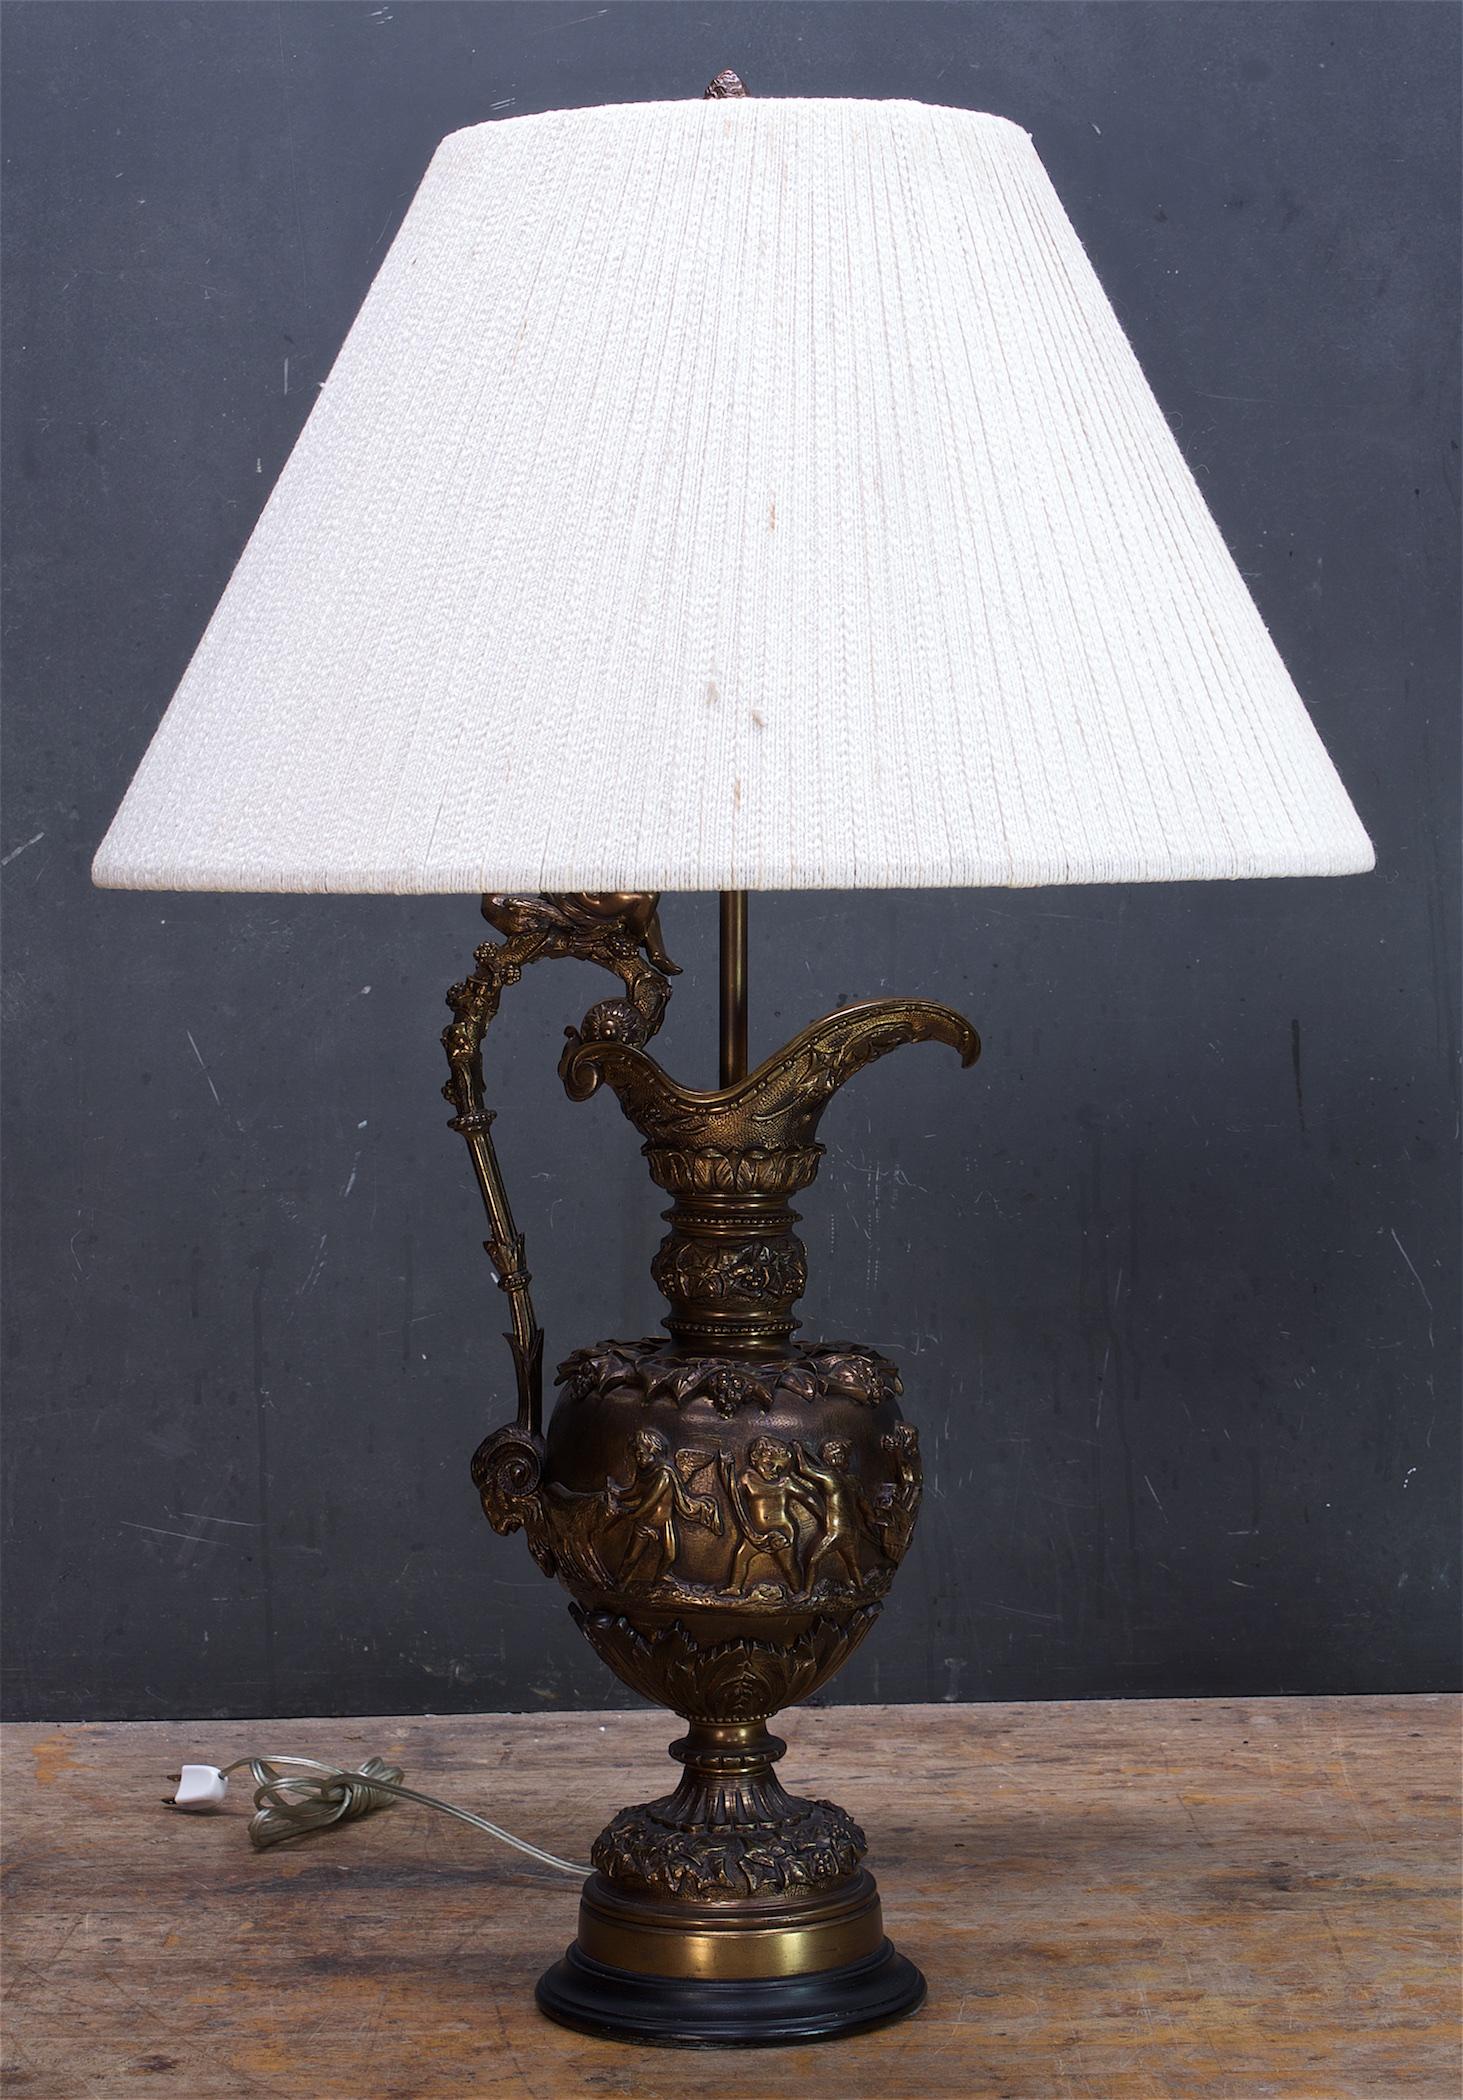 Antique Bronze Ewers Bacchus Table Lamps Maximalist Luxury Neoclassical In Good Condition For Sale In Hyattsville, MD